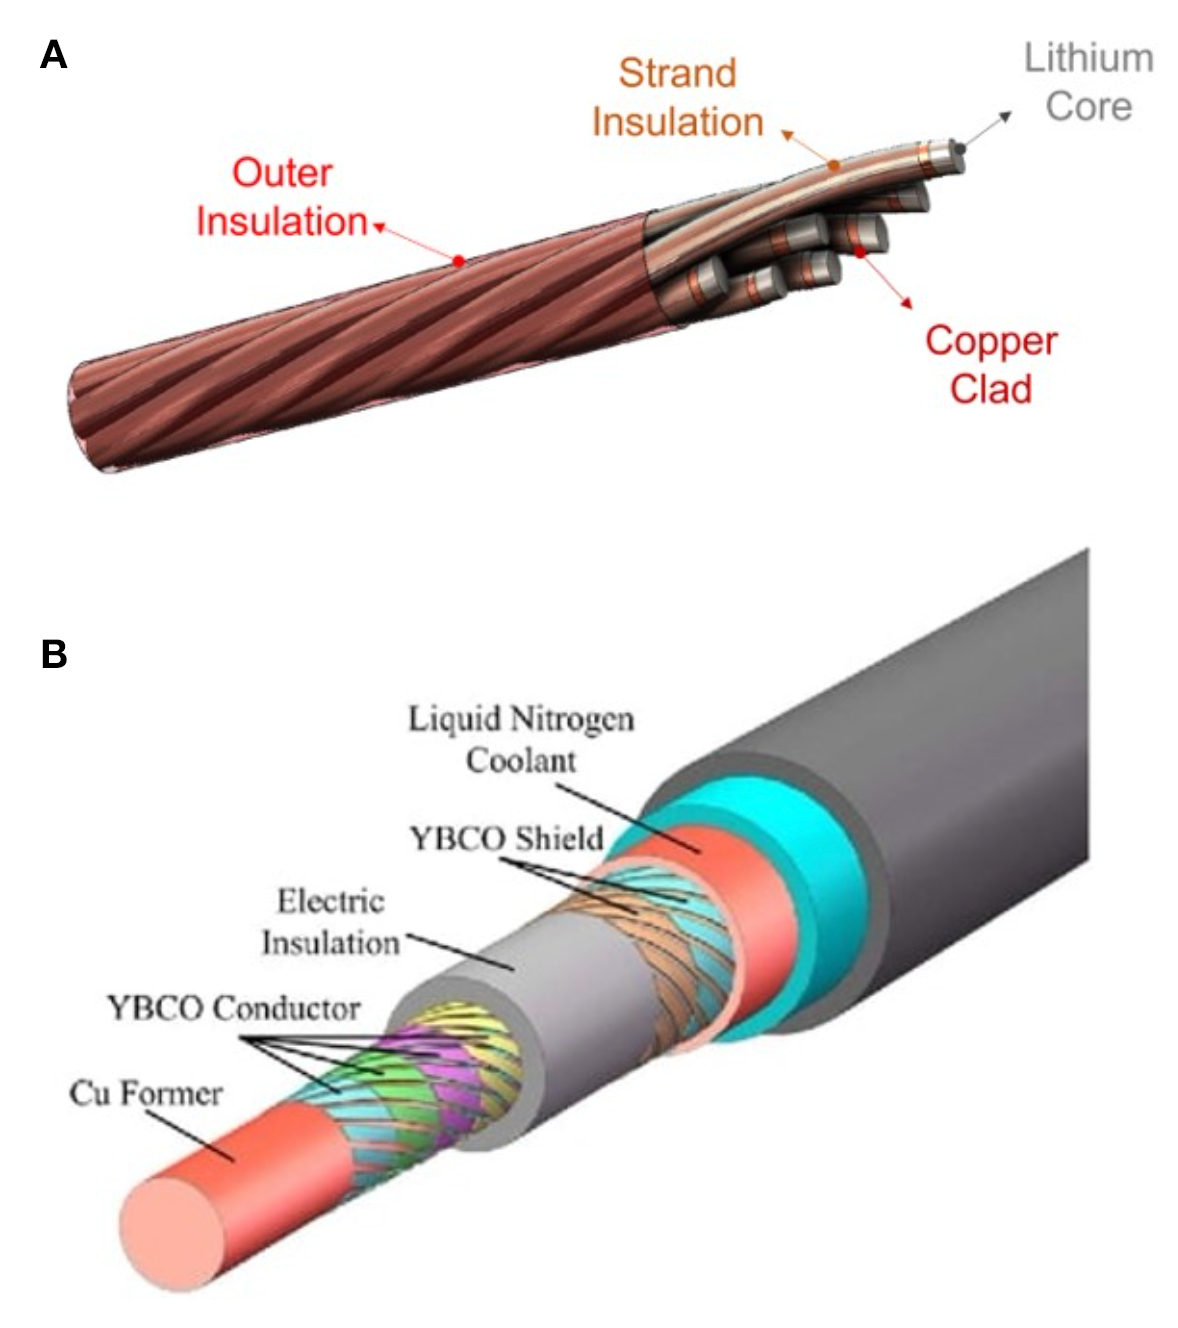 Upper illustration: cutaway of twisted strands of copper clad lithium core in an outer insulated cover. Lower illustration: cutaway with an inner copper former, clad in YBCO conductor, wrapped in electric insulation with another layer of YBCO shield cover